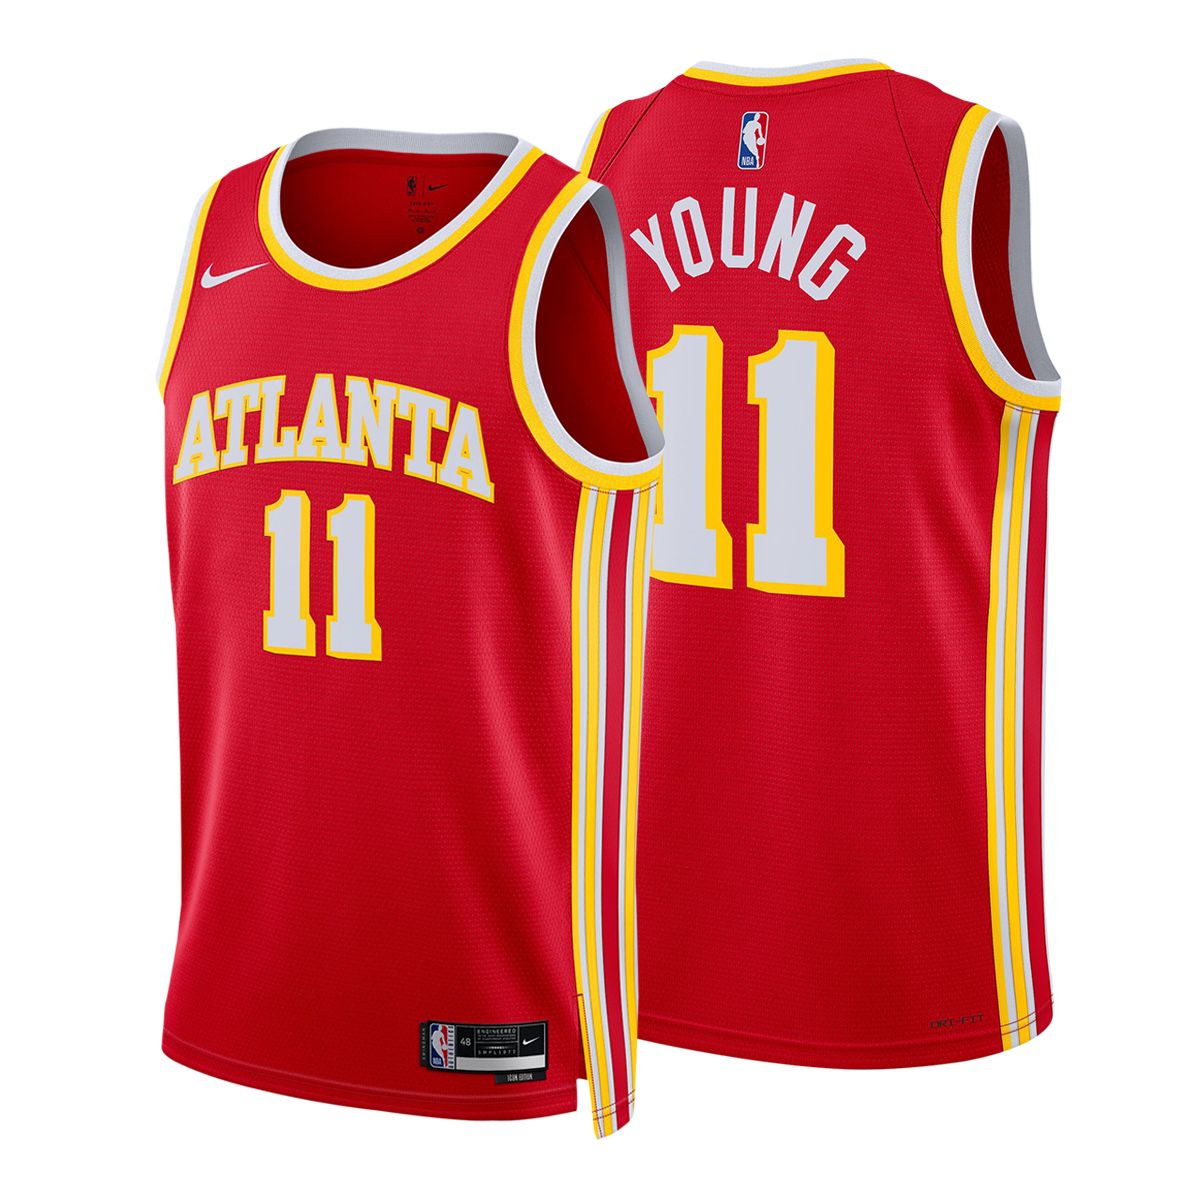 Atlanta Hawks on X: First day of school which Hawks jersey are you  wearing?  / X